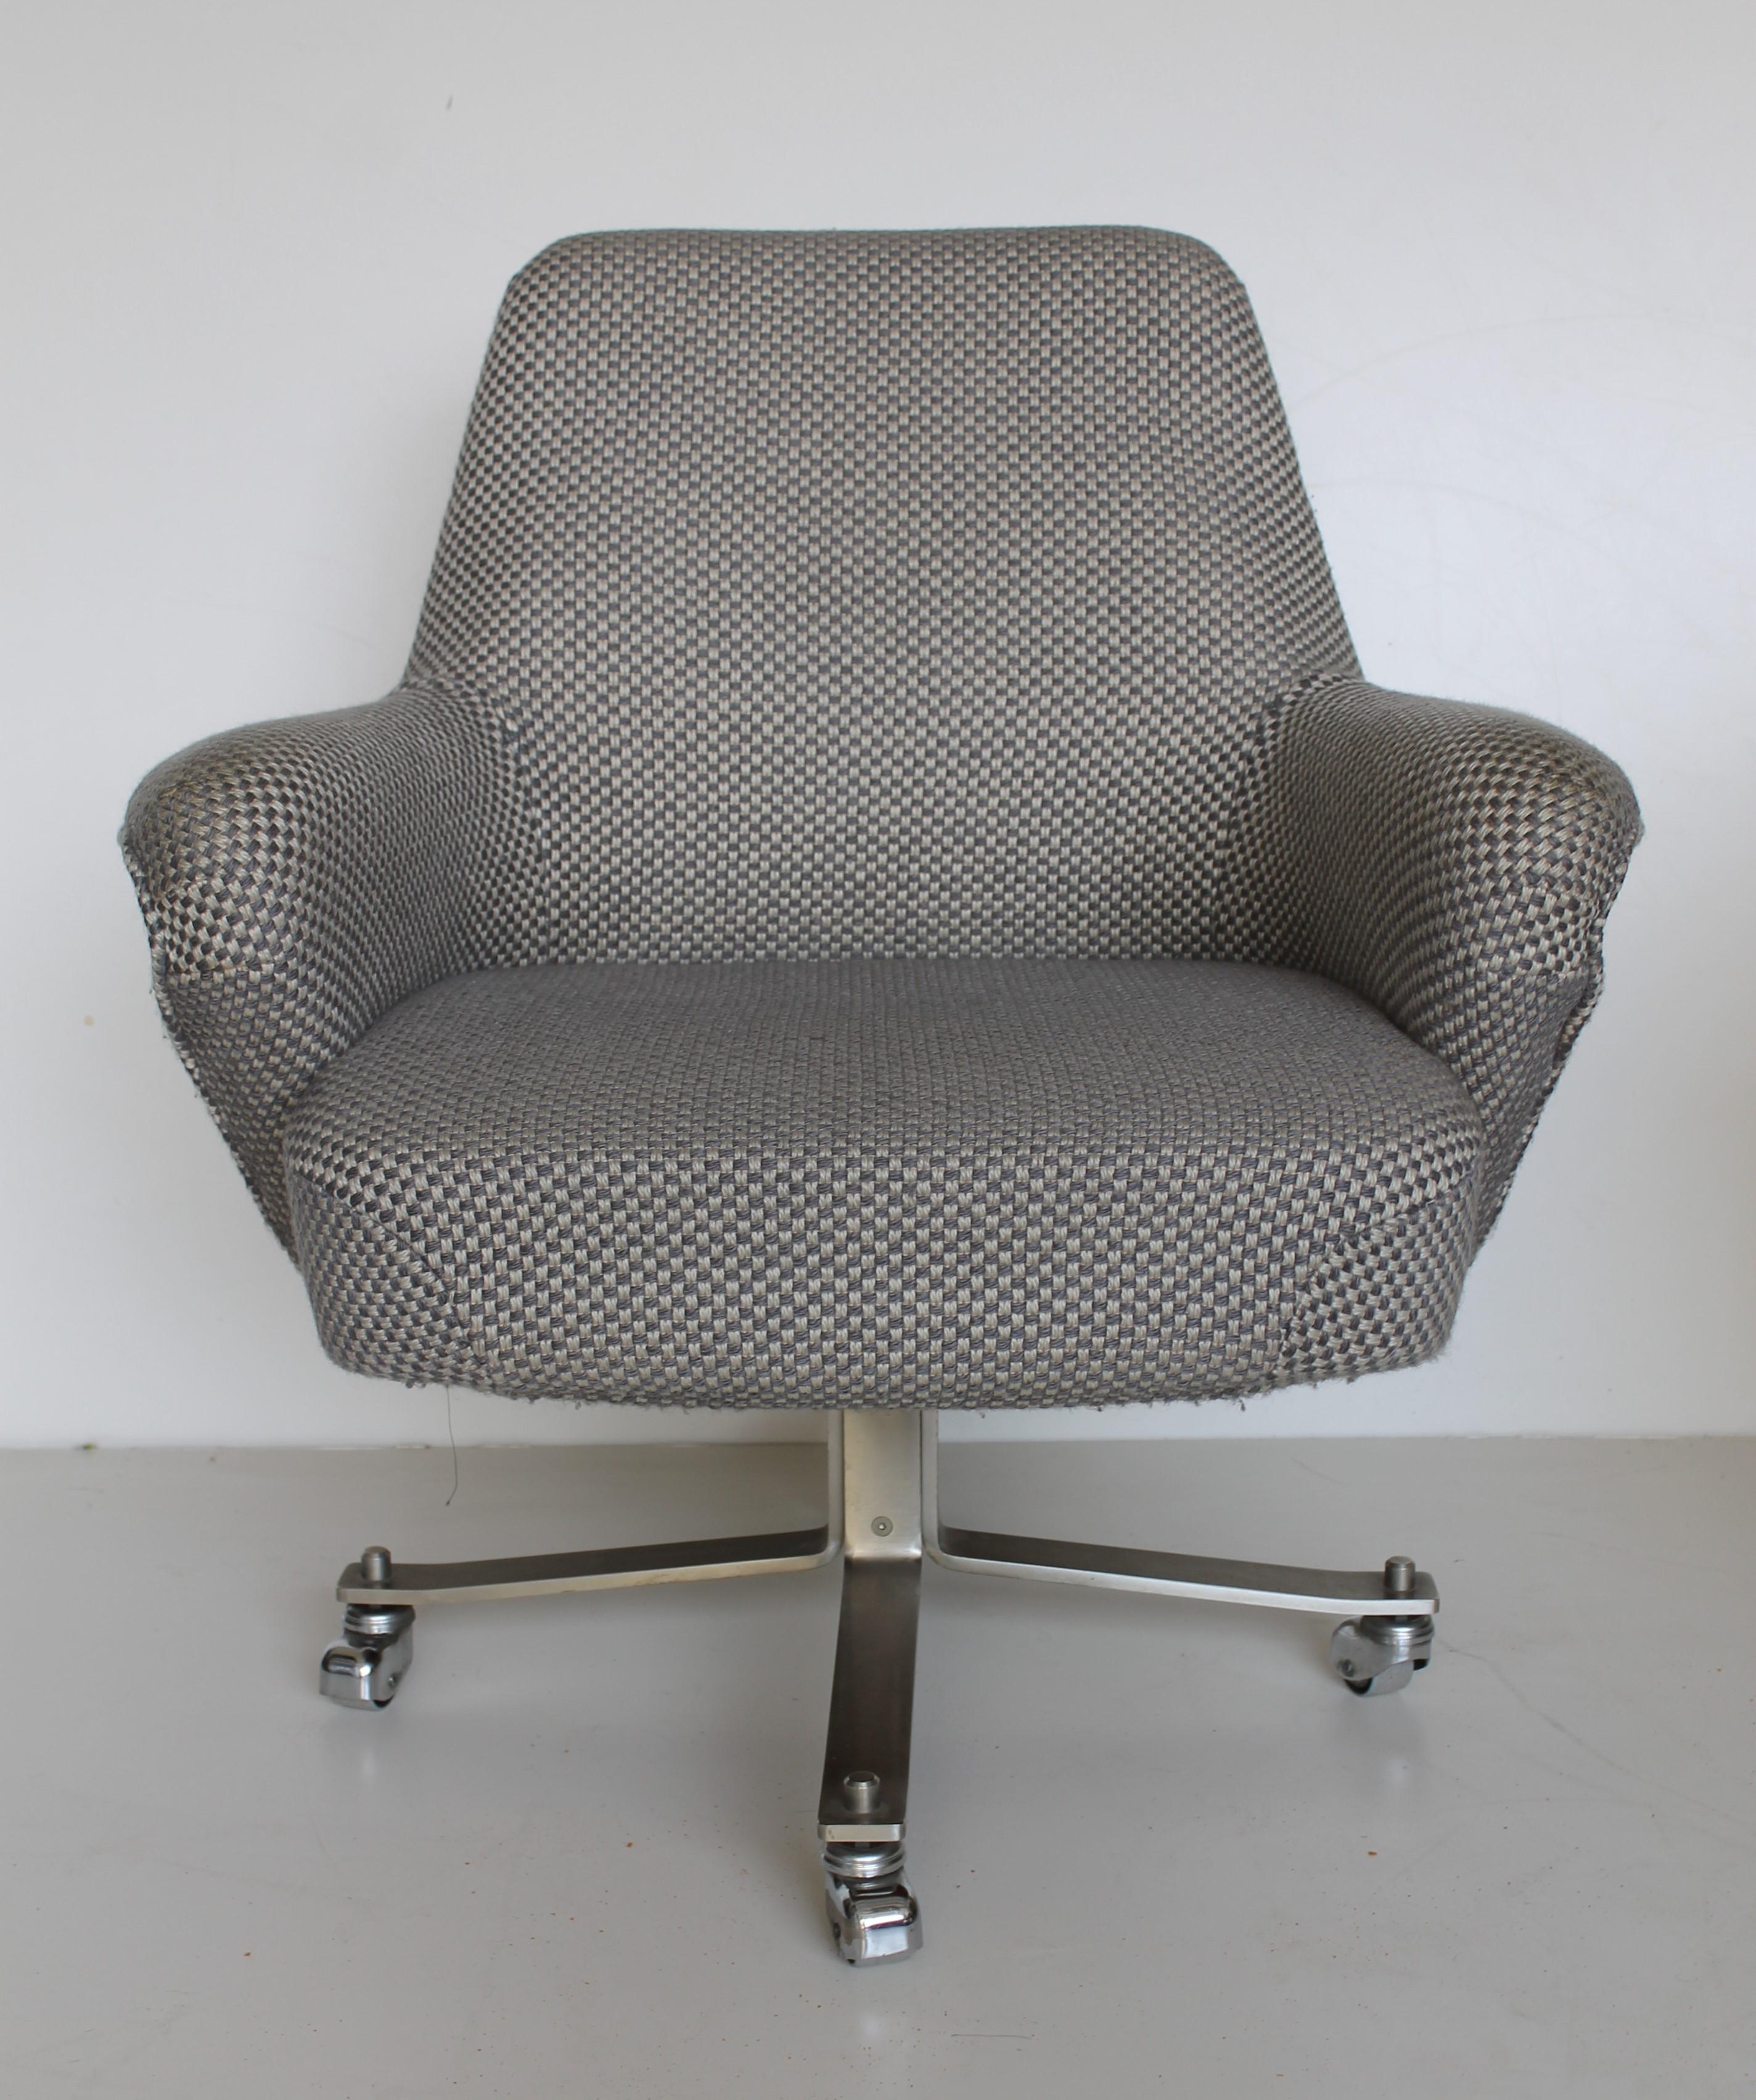 Set of six 1970s swivel armchairs by Gianni Moscatelli for Formanova.
Grey and white removable and washable woven fabric and steel legs with wheels.

Detailed pictures show the clean fabric.